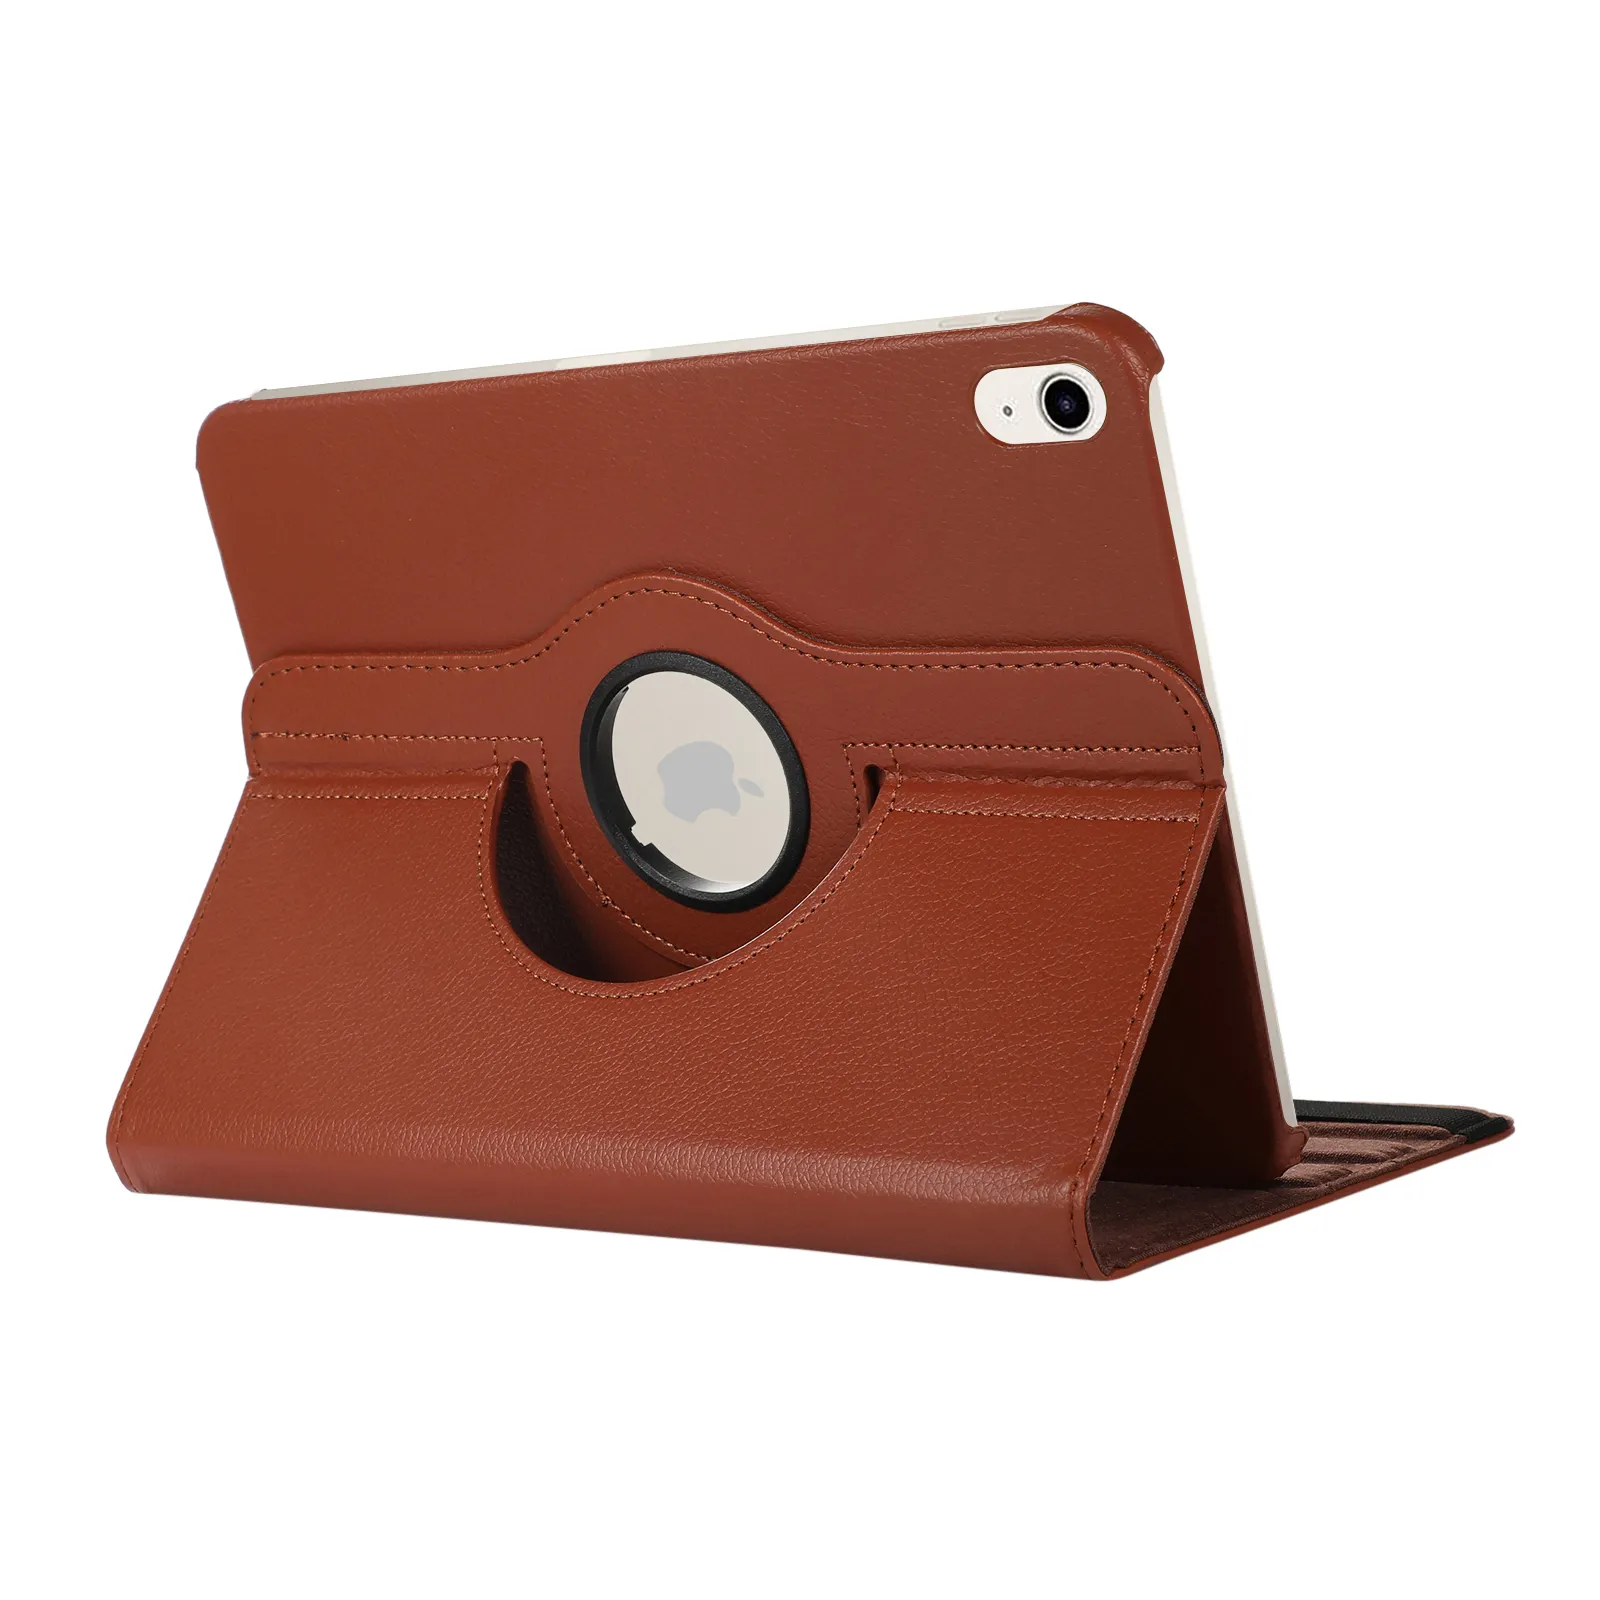 Tablet covers for ipad 10th generation cover 10.9 Leather Tablet case cover for ipad 10.2 9th generation case